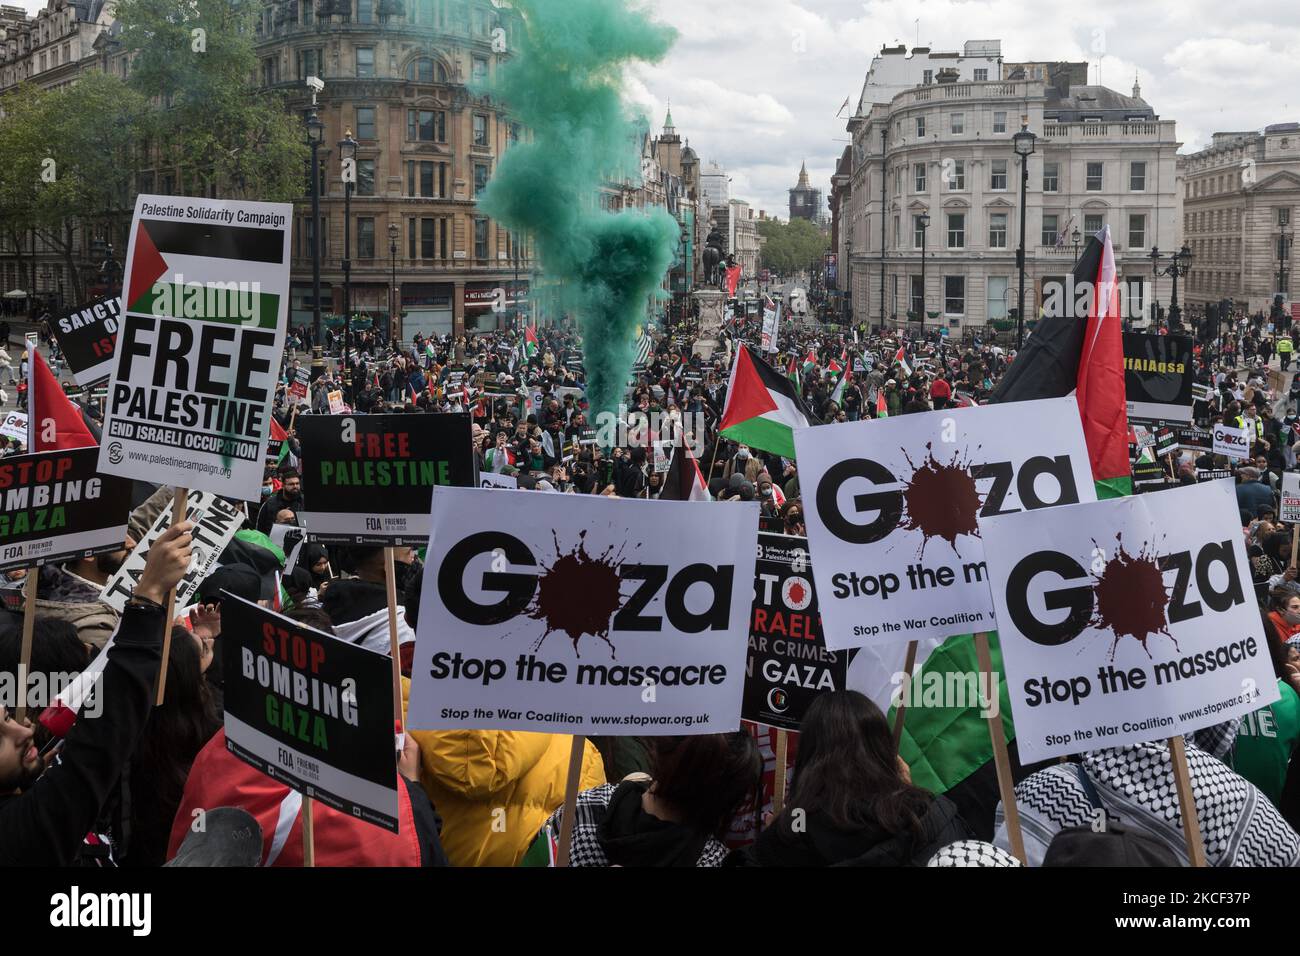 LONDON, UNITED KINGDOM - MAY 22, 2021: A smoke flare is set off as tens of thousands of protesters gather in Trafalgar Square in central London during a demonstration in support of Palestine, on 22 May, 2021 in London, England. A ceasefire between Israel and Palestine came into force on Friday following 11 days of air strikes that left more than 250 dead as conflict escalated over planned evictions of Palestinian families from their homes by Jewish settlers in the Sheikh Jarrah district of East Jerusalem and clashes with security forces around the Old City during Ramadan. (Photo by WIktor Szym Stock Photo